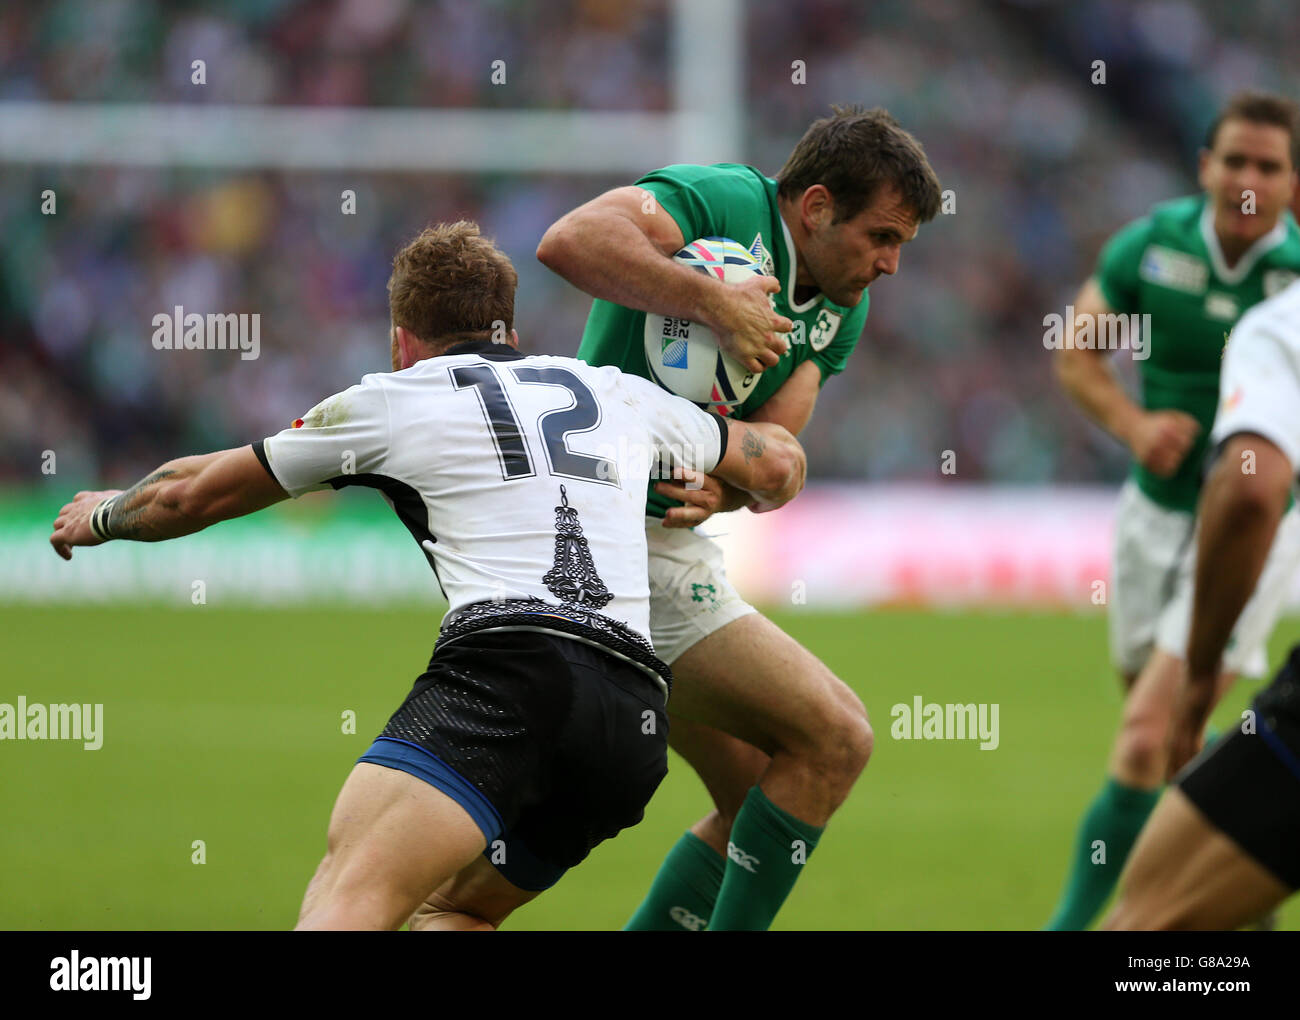 Rugby Union - Rugby World Cup 2015 - Pool D - Ireland v Romania - Wembley Stadium. Romania's Csaba Gal (left) tackles Ireland's Jared Payne (right) during the Rugby World Cup match at Wembley Stadium, London. Stock Photo